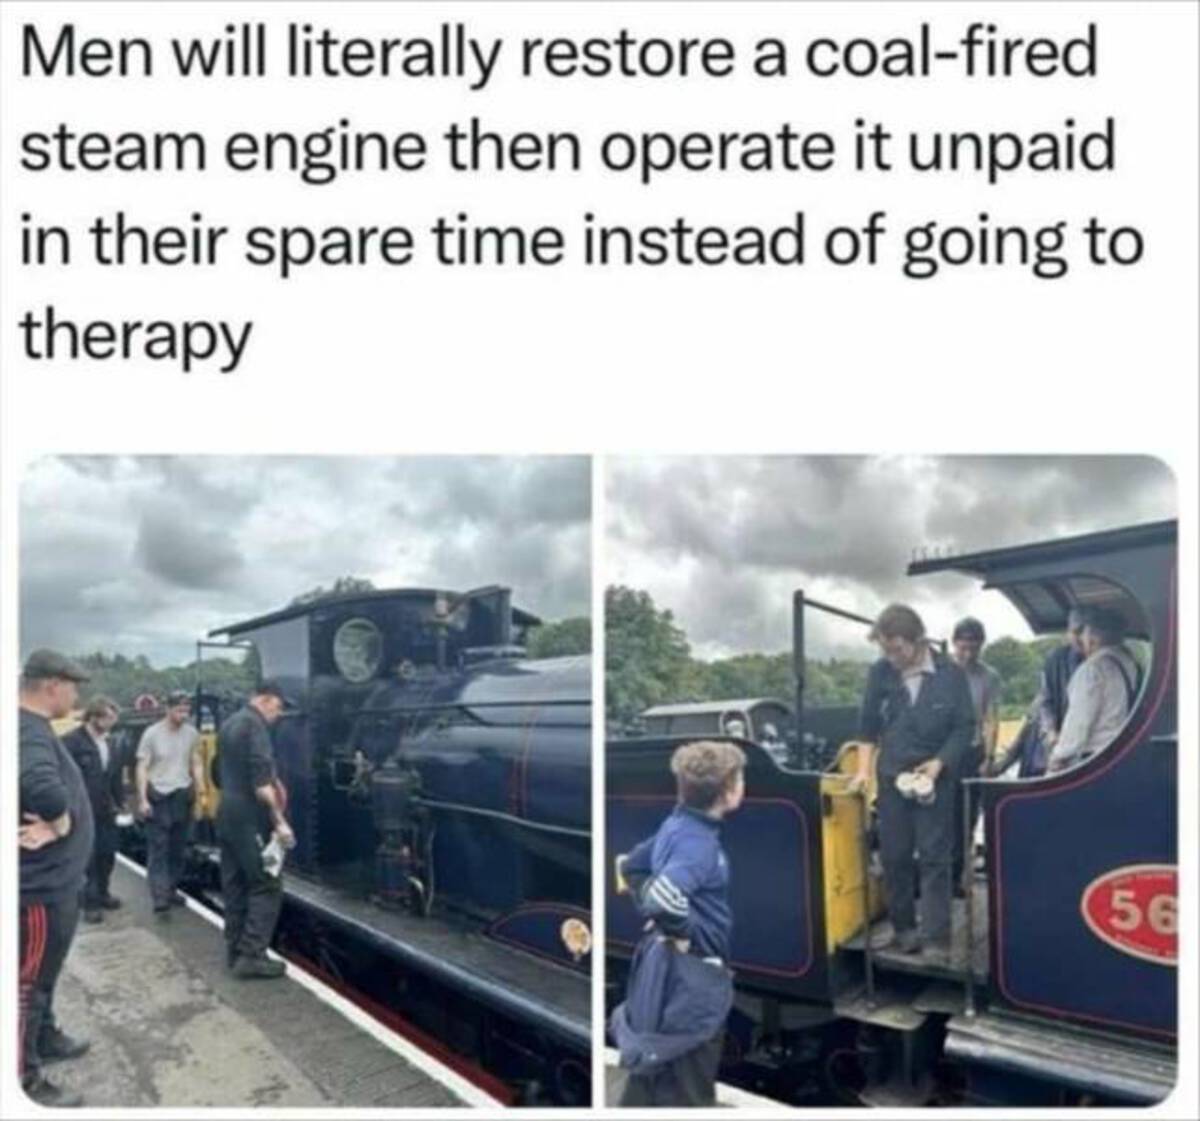 men will before going to therapy - Men will literally restore a coalfired steam engine then operate it unpaid in their spare time instead of going to therapy 56